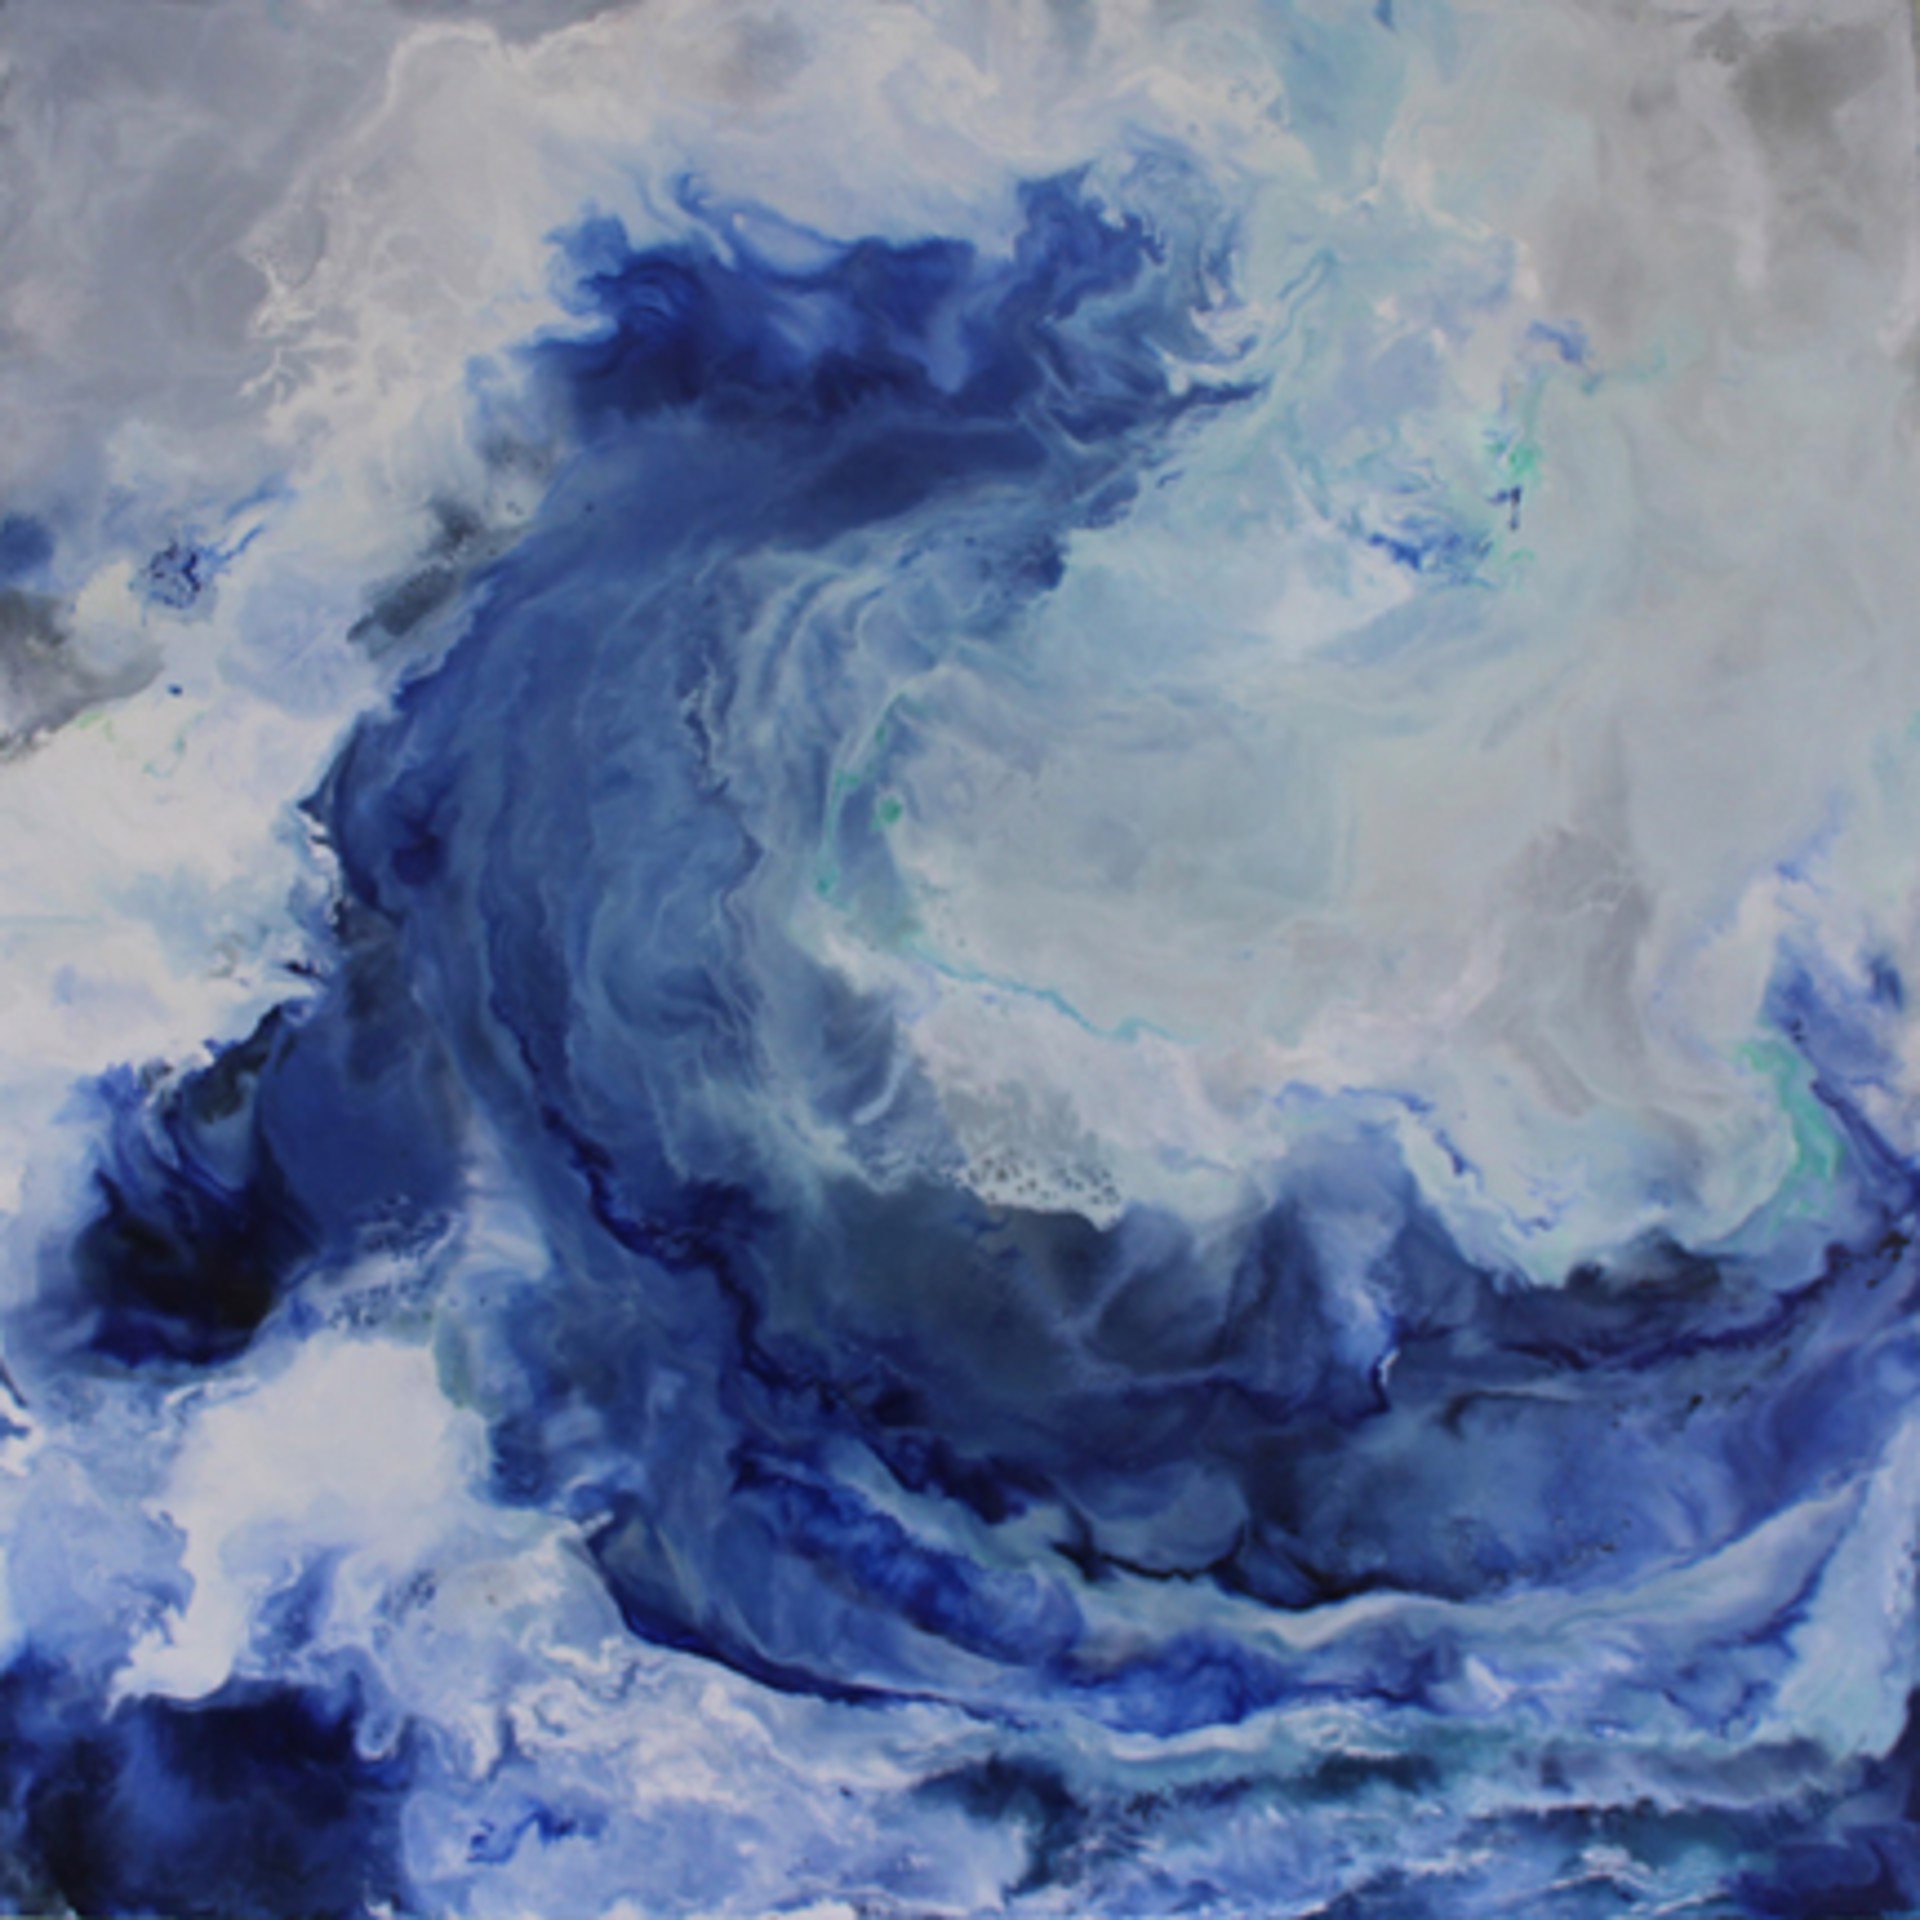 One Wave by Ruth Hamill